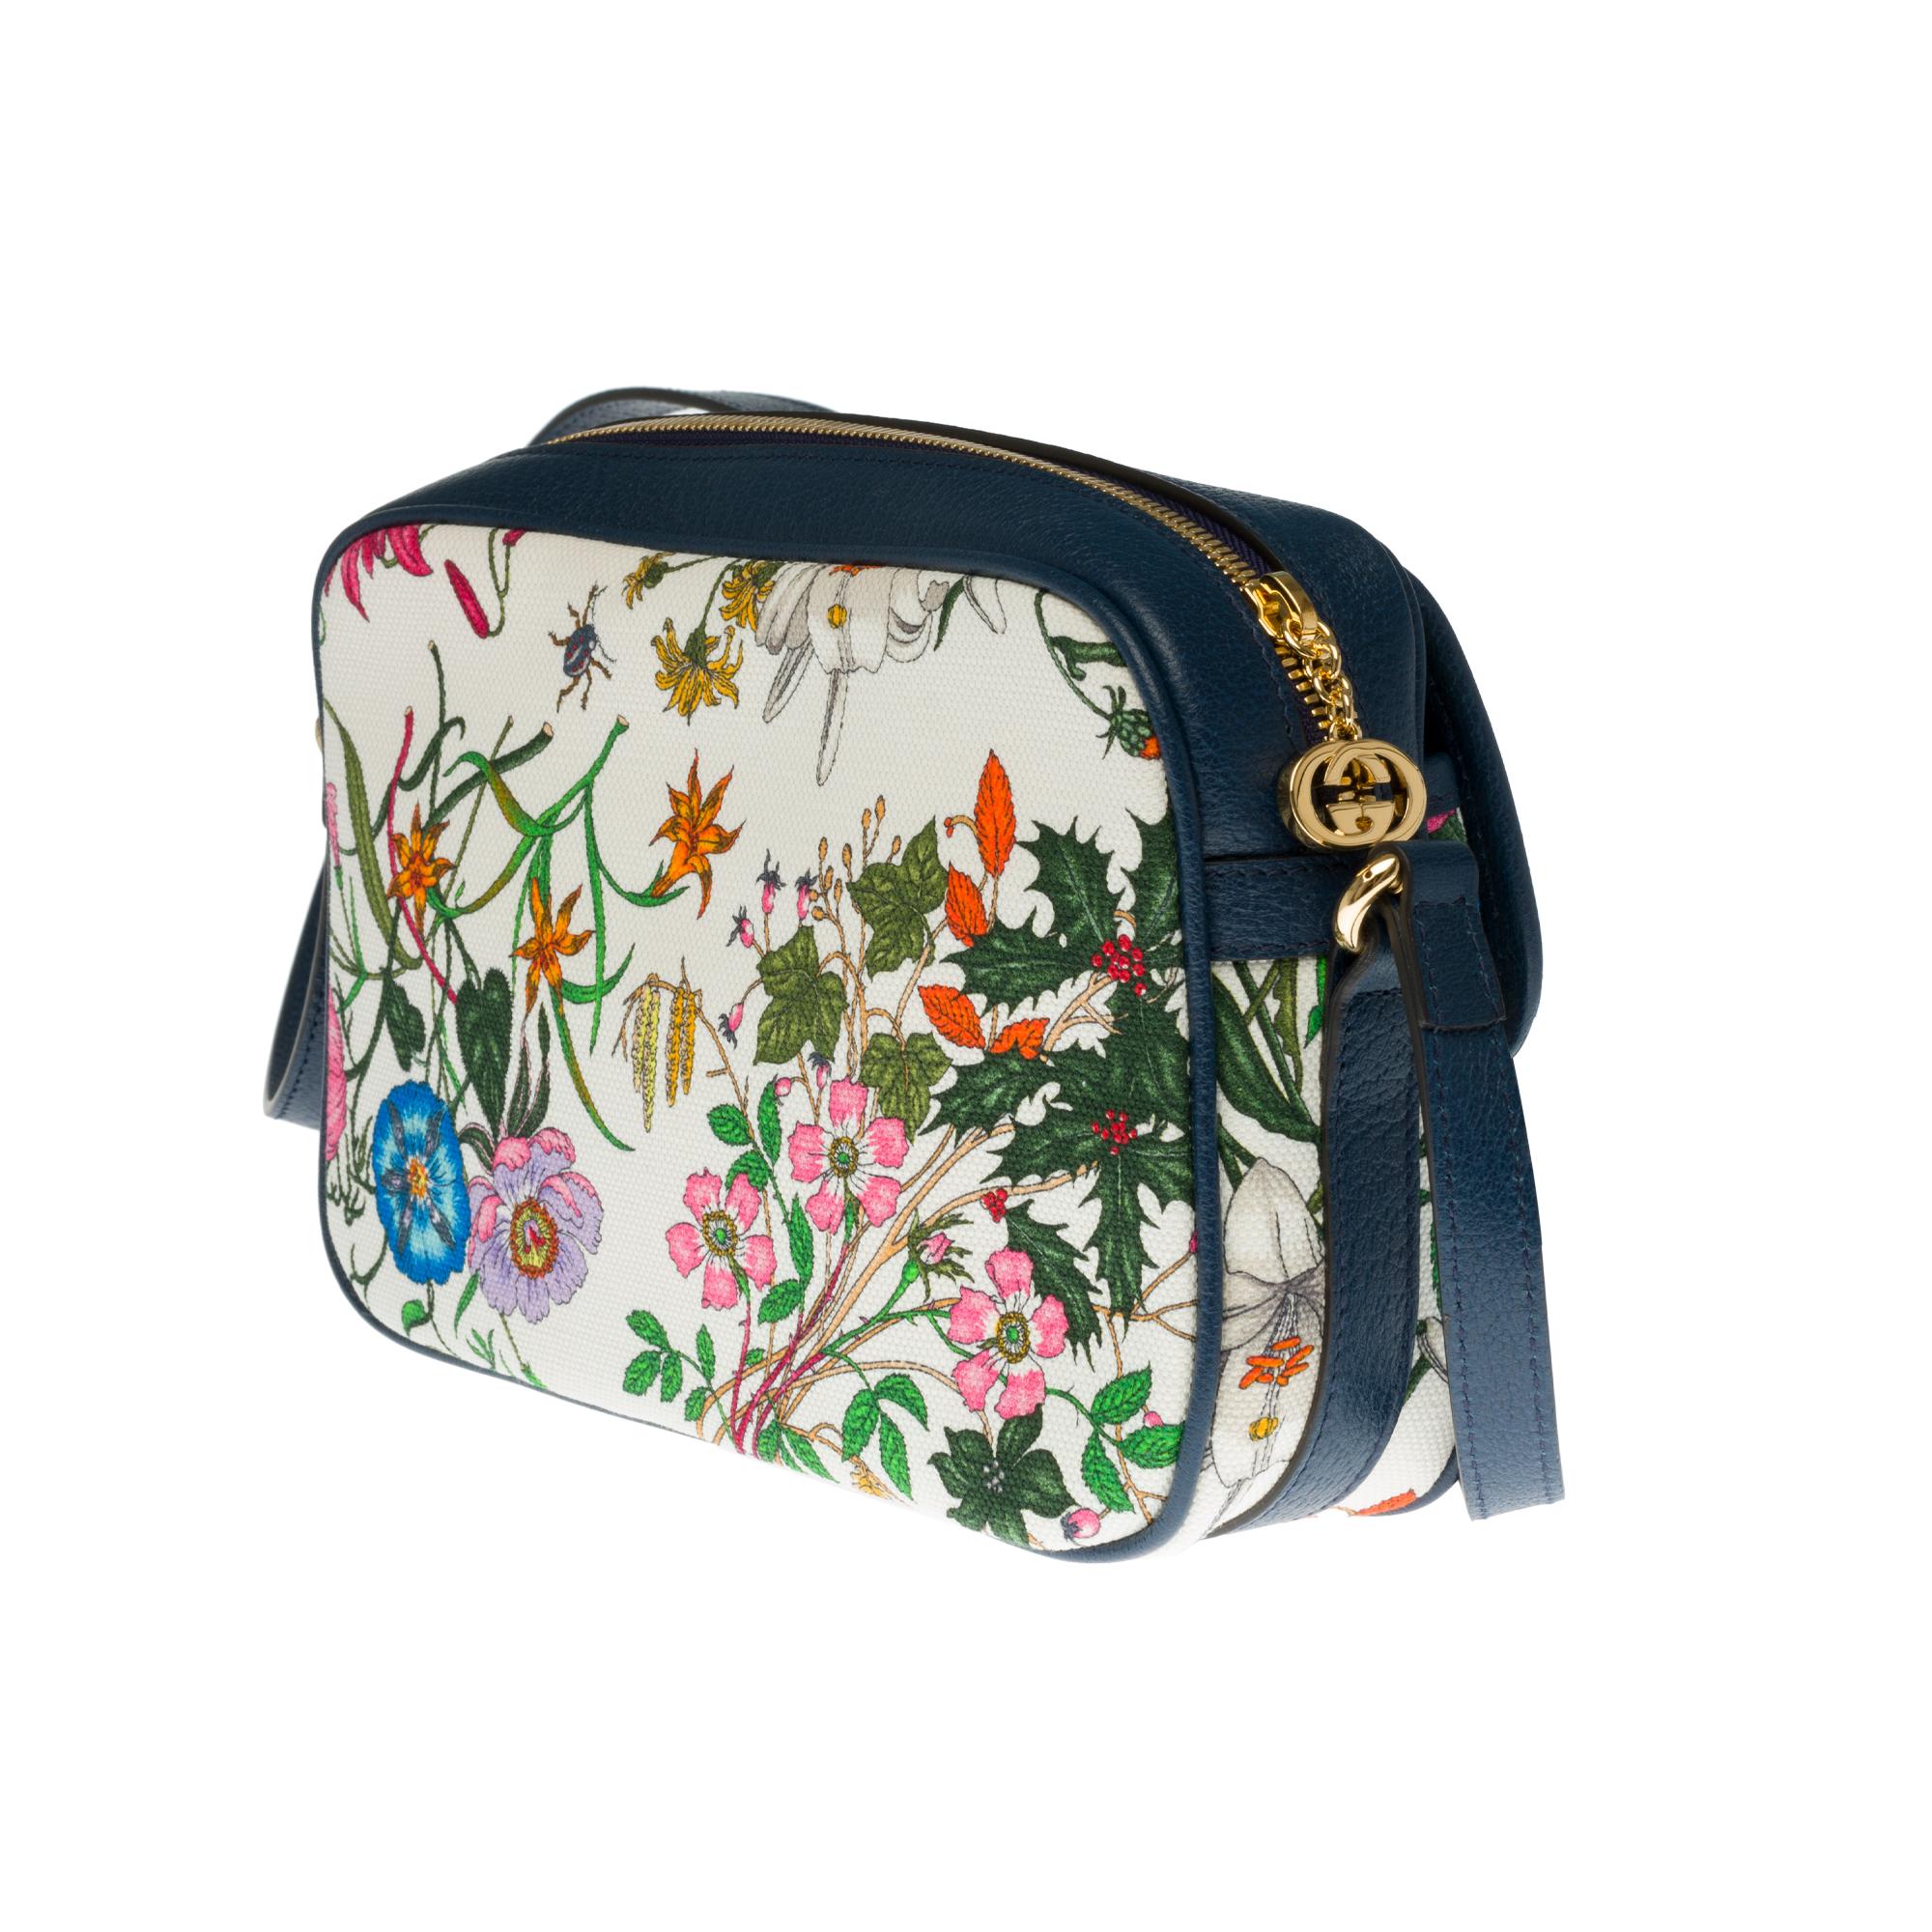 Black BRAND NEW / Gucci Flora Crossbody bag  in blue canvas and leather